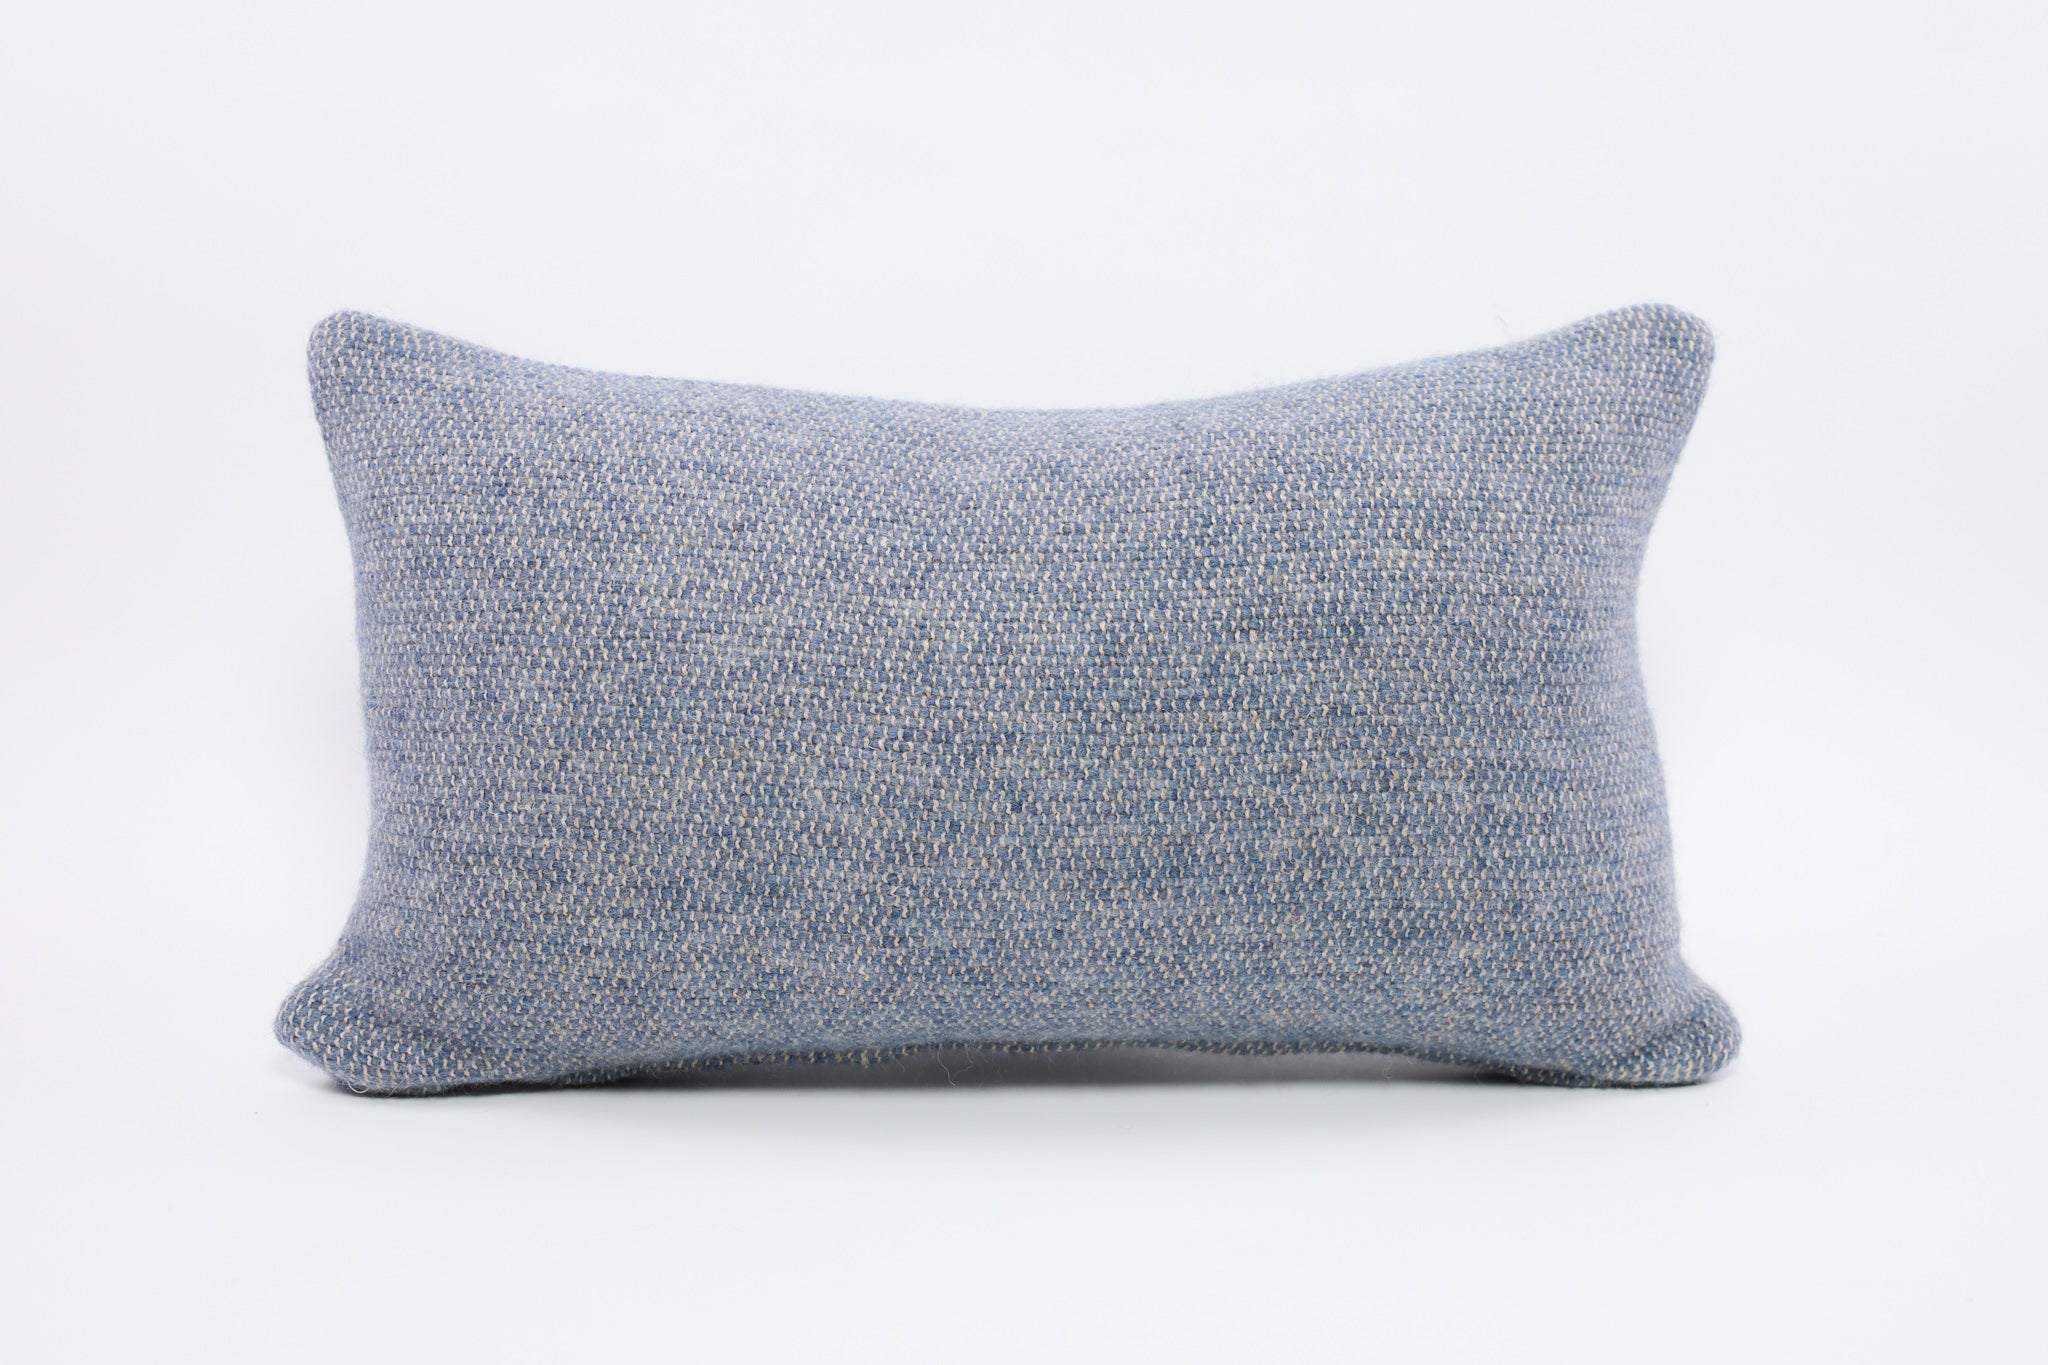 curtis pillow by uniquity at adorn.house